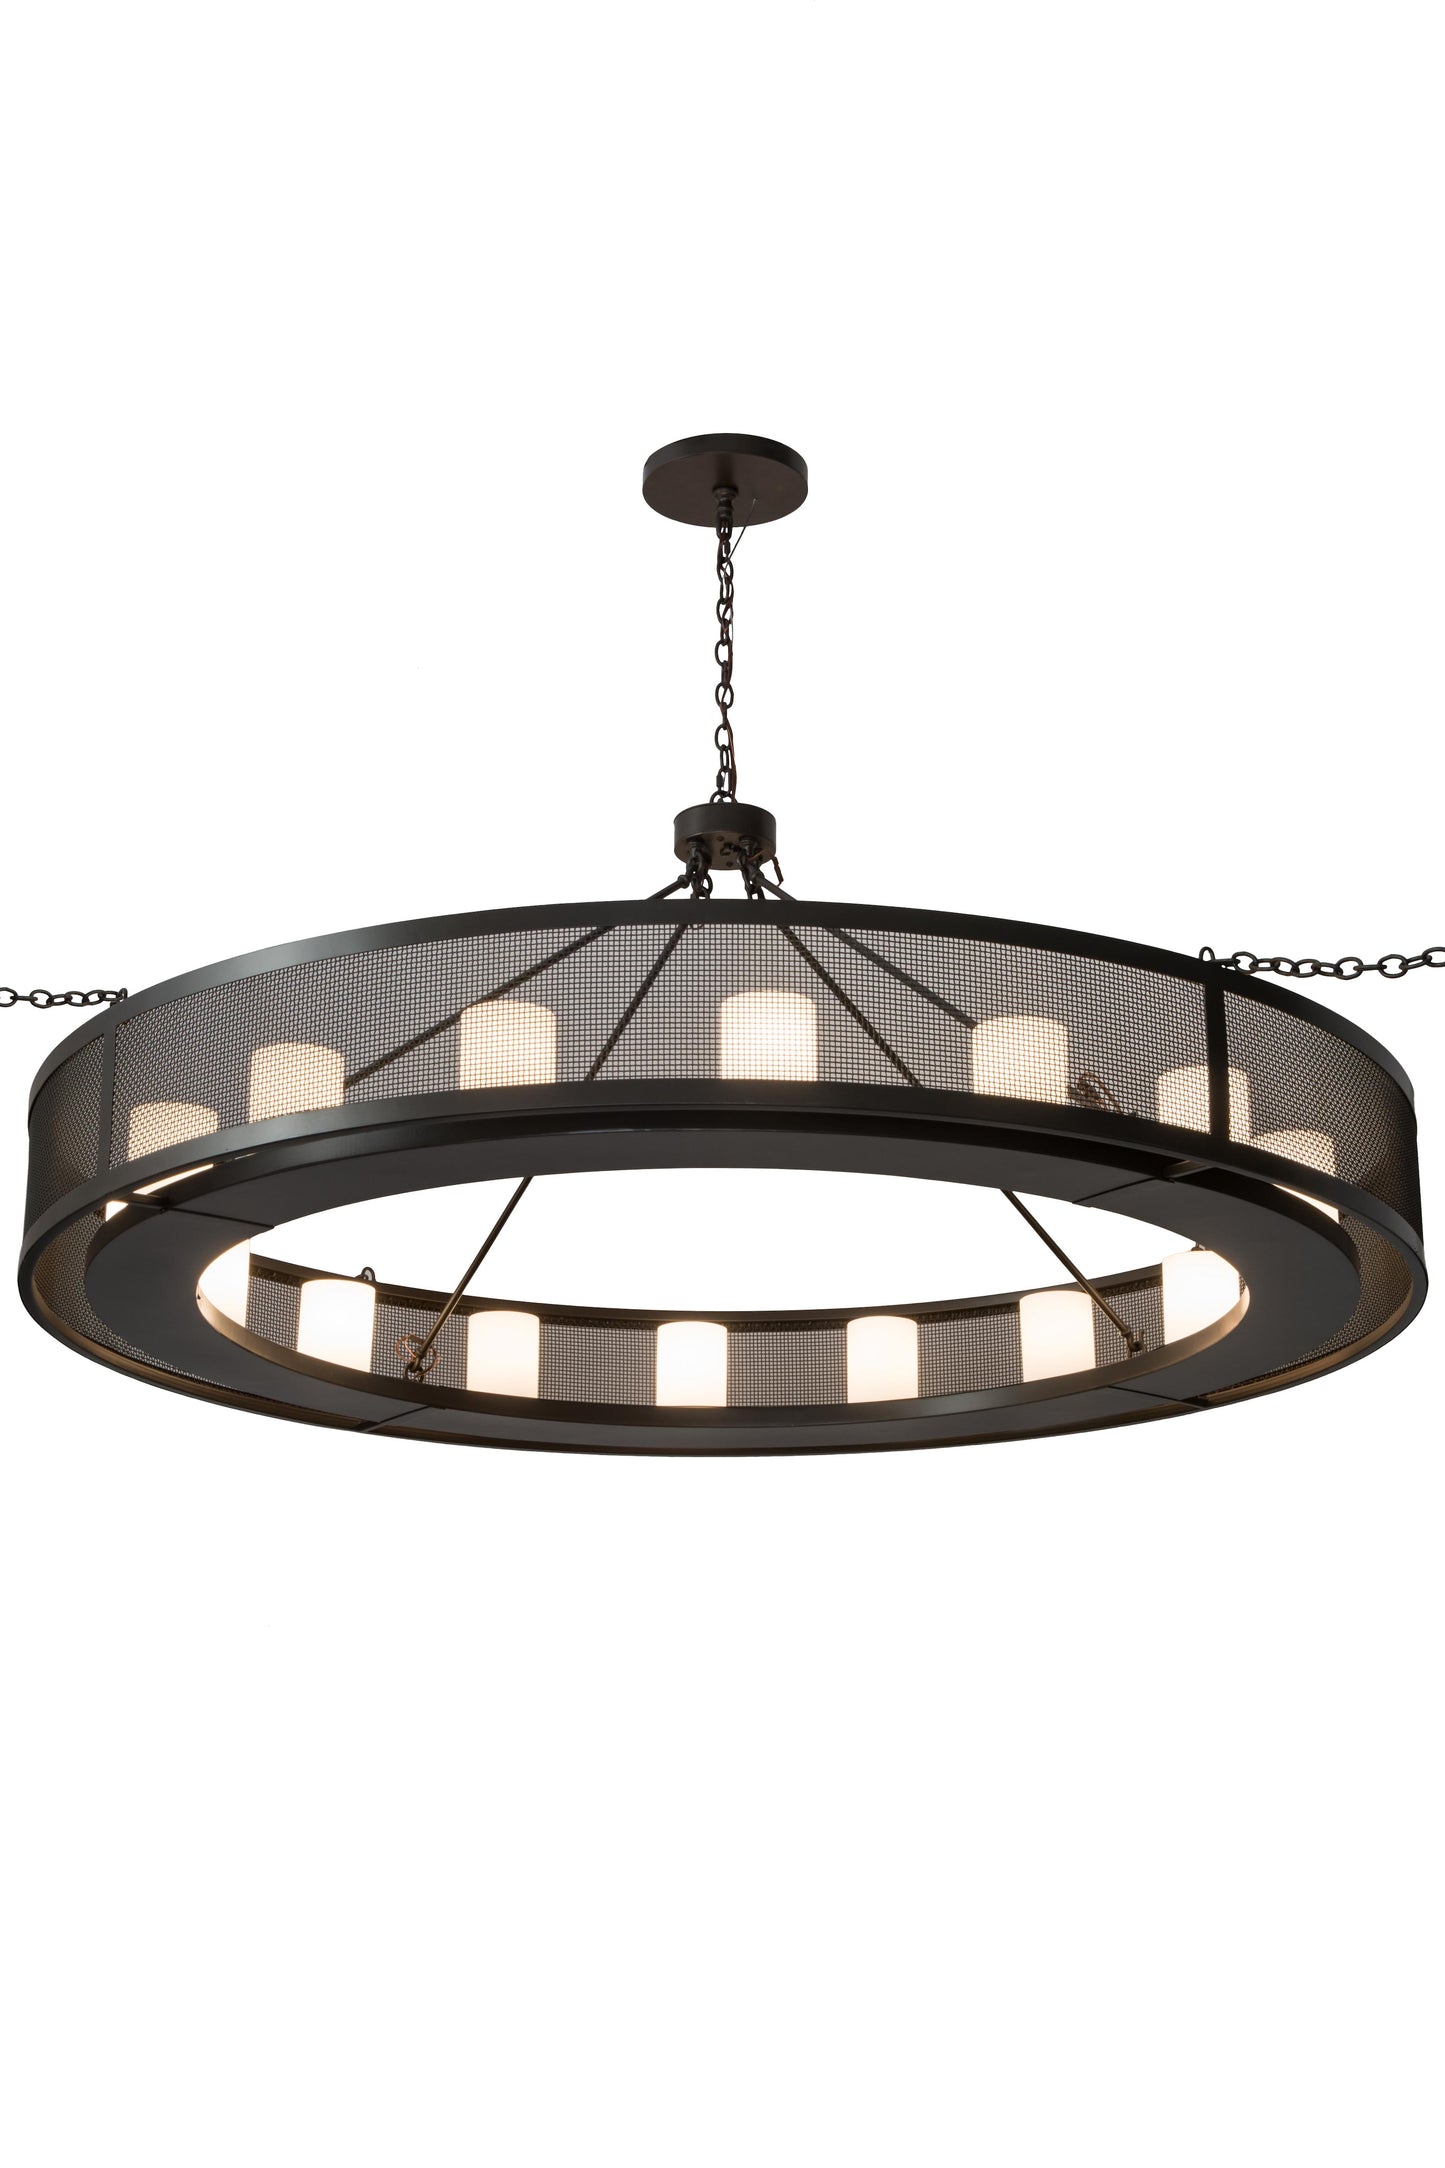 78" Loxley Golpe 16-Light Chandelier by 2nd Ave Lighting